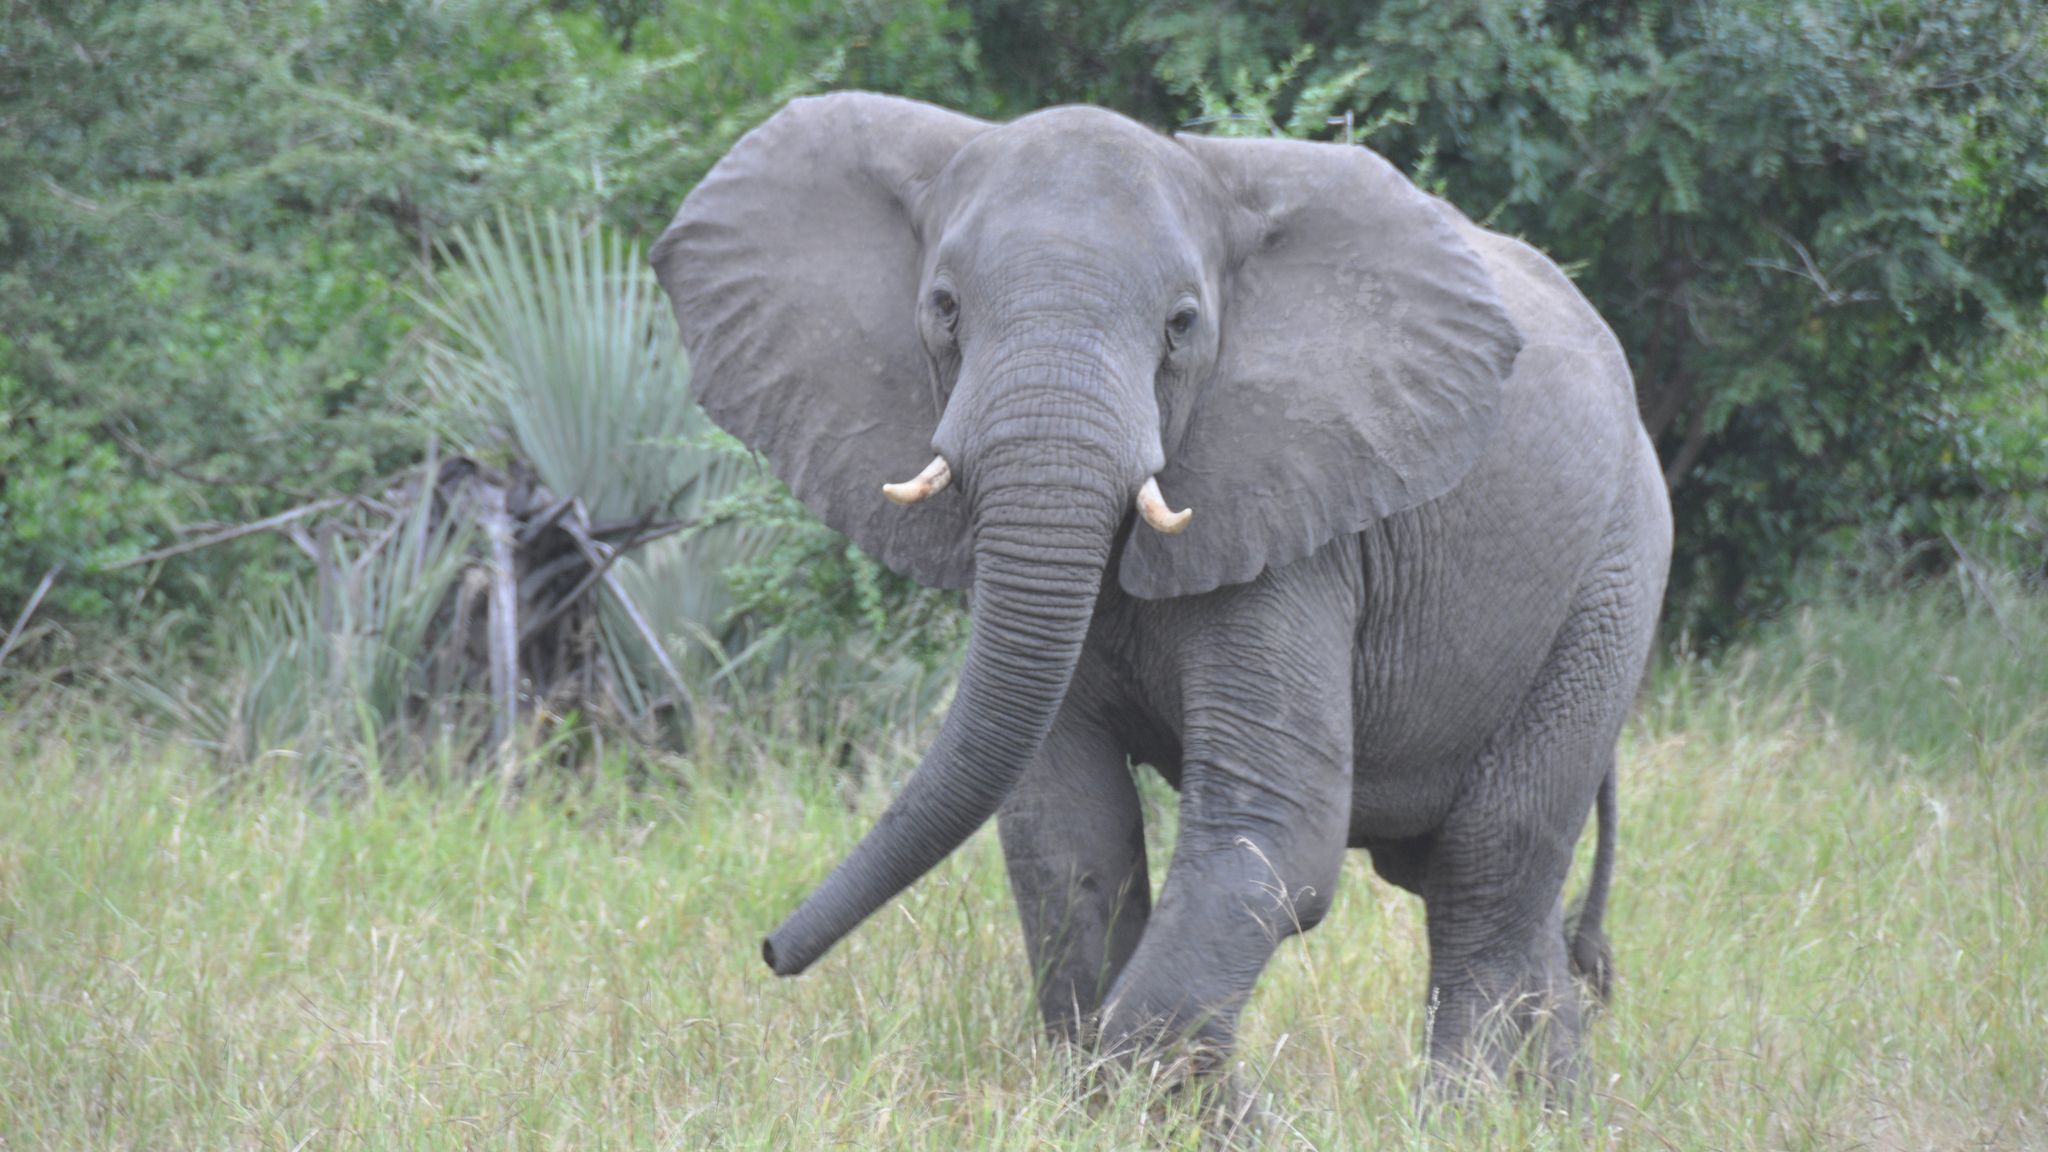 An elephant in Gorongosa National Park. Photo © USAID Mozambique / Flickr through a Creative Commons license